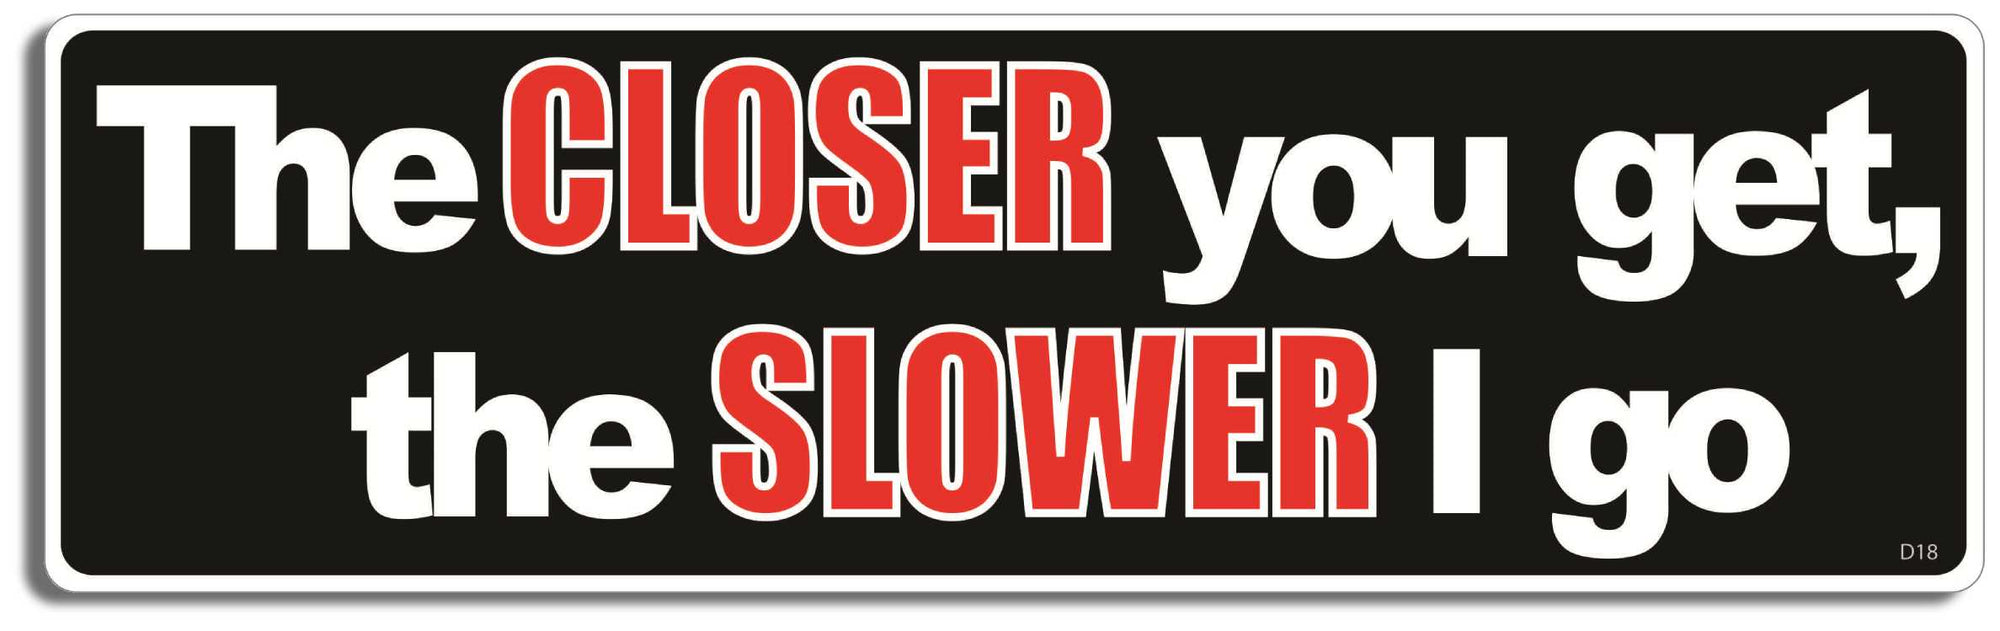 The closer you get, the slower I go - 3" x 10" Bumper Sticker--Car Magnet- -  Decal Bumper Sticker-funny Bumper Sticker Car Magnet The closer you get, the slower I go-  Decal for carsdrive safely, Driving, Funny, safe driving, tailgaters, tailgating